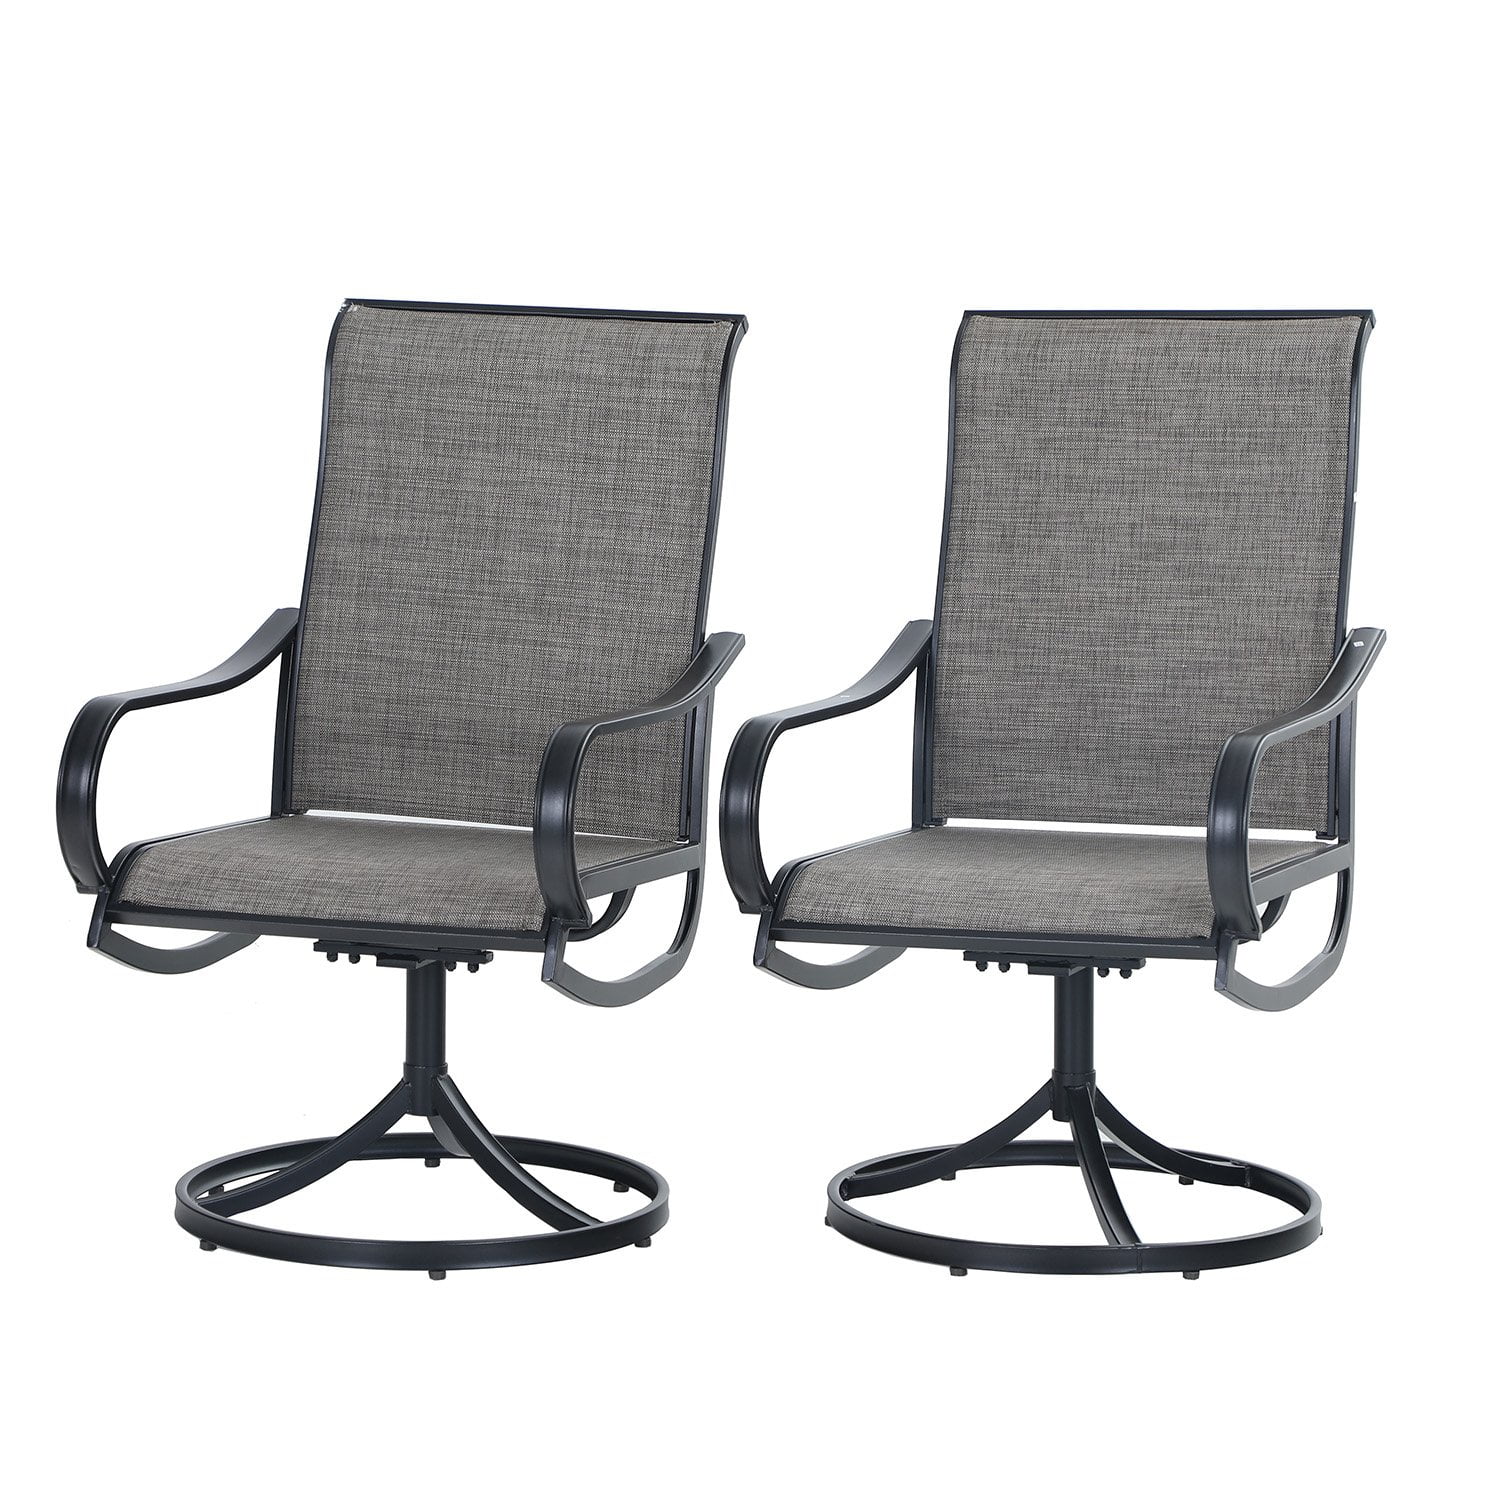 Sophia & William 2Pcs Patio Dining Swivel Chairs Set with Black Steel Frame